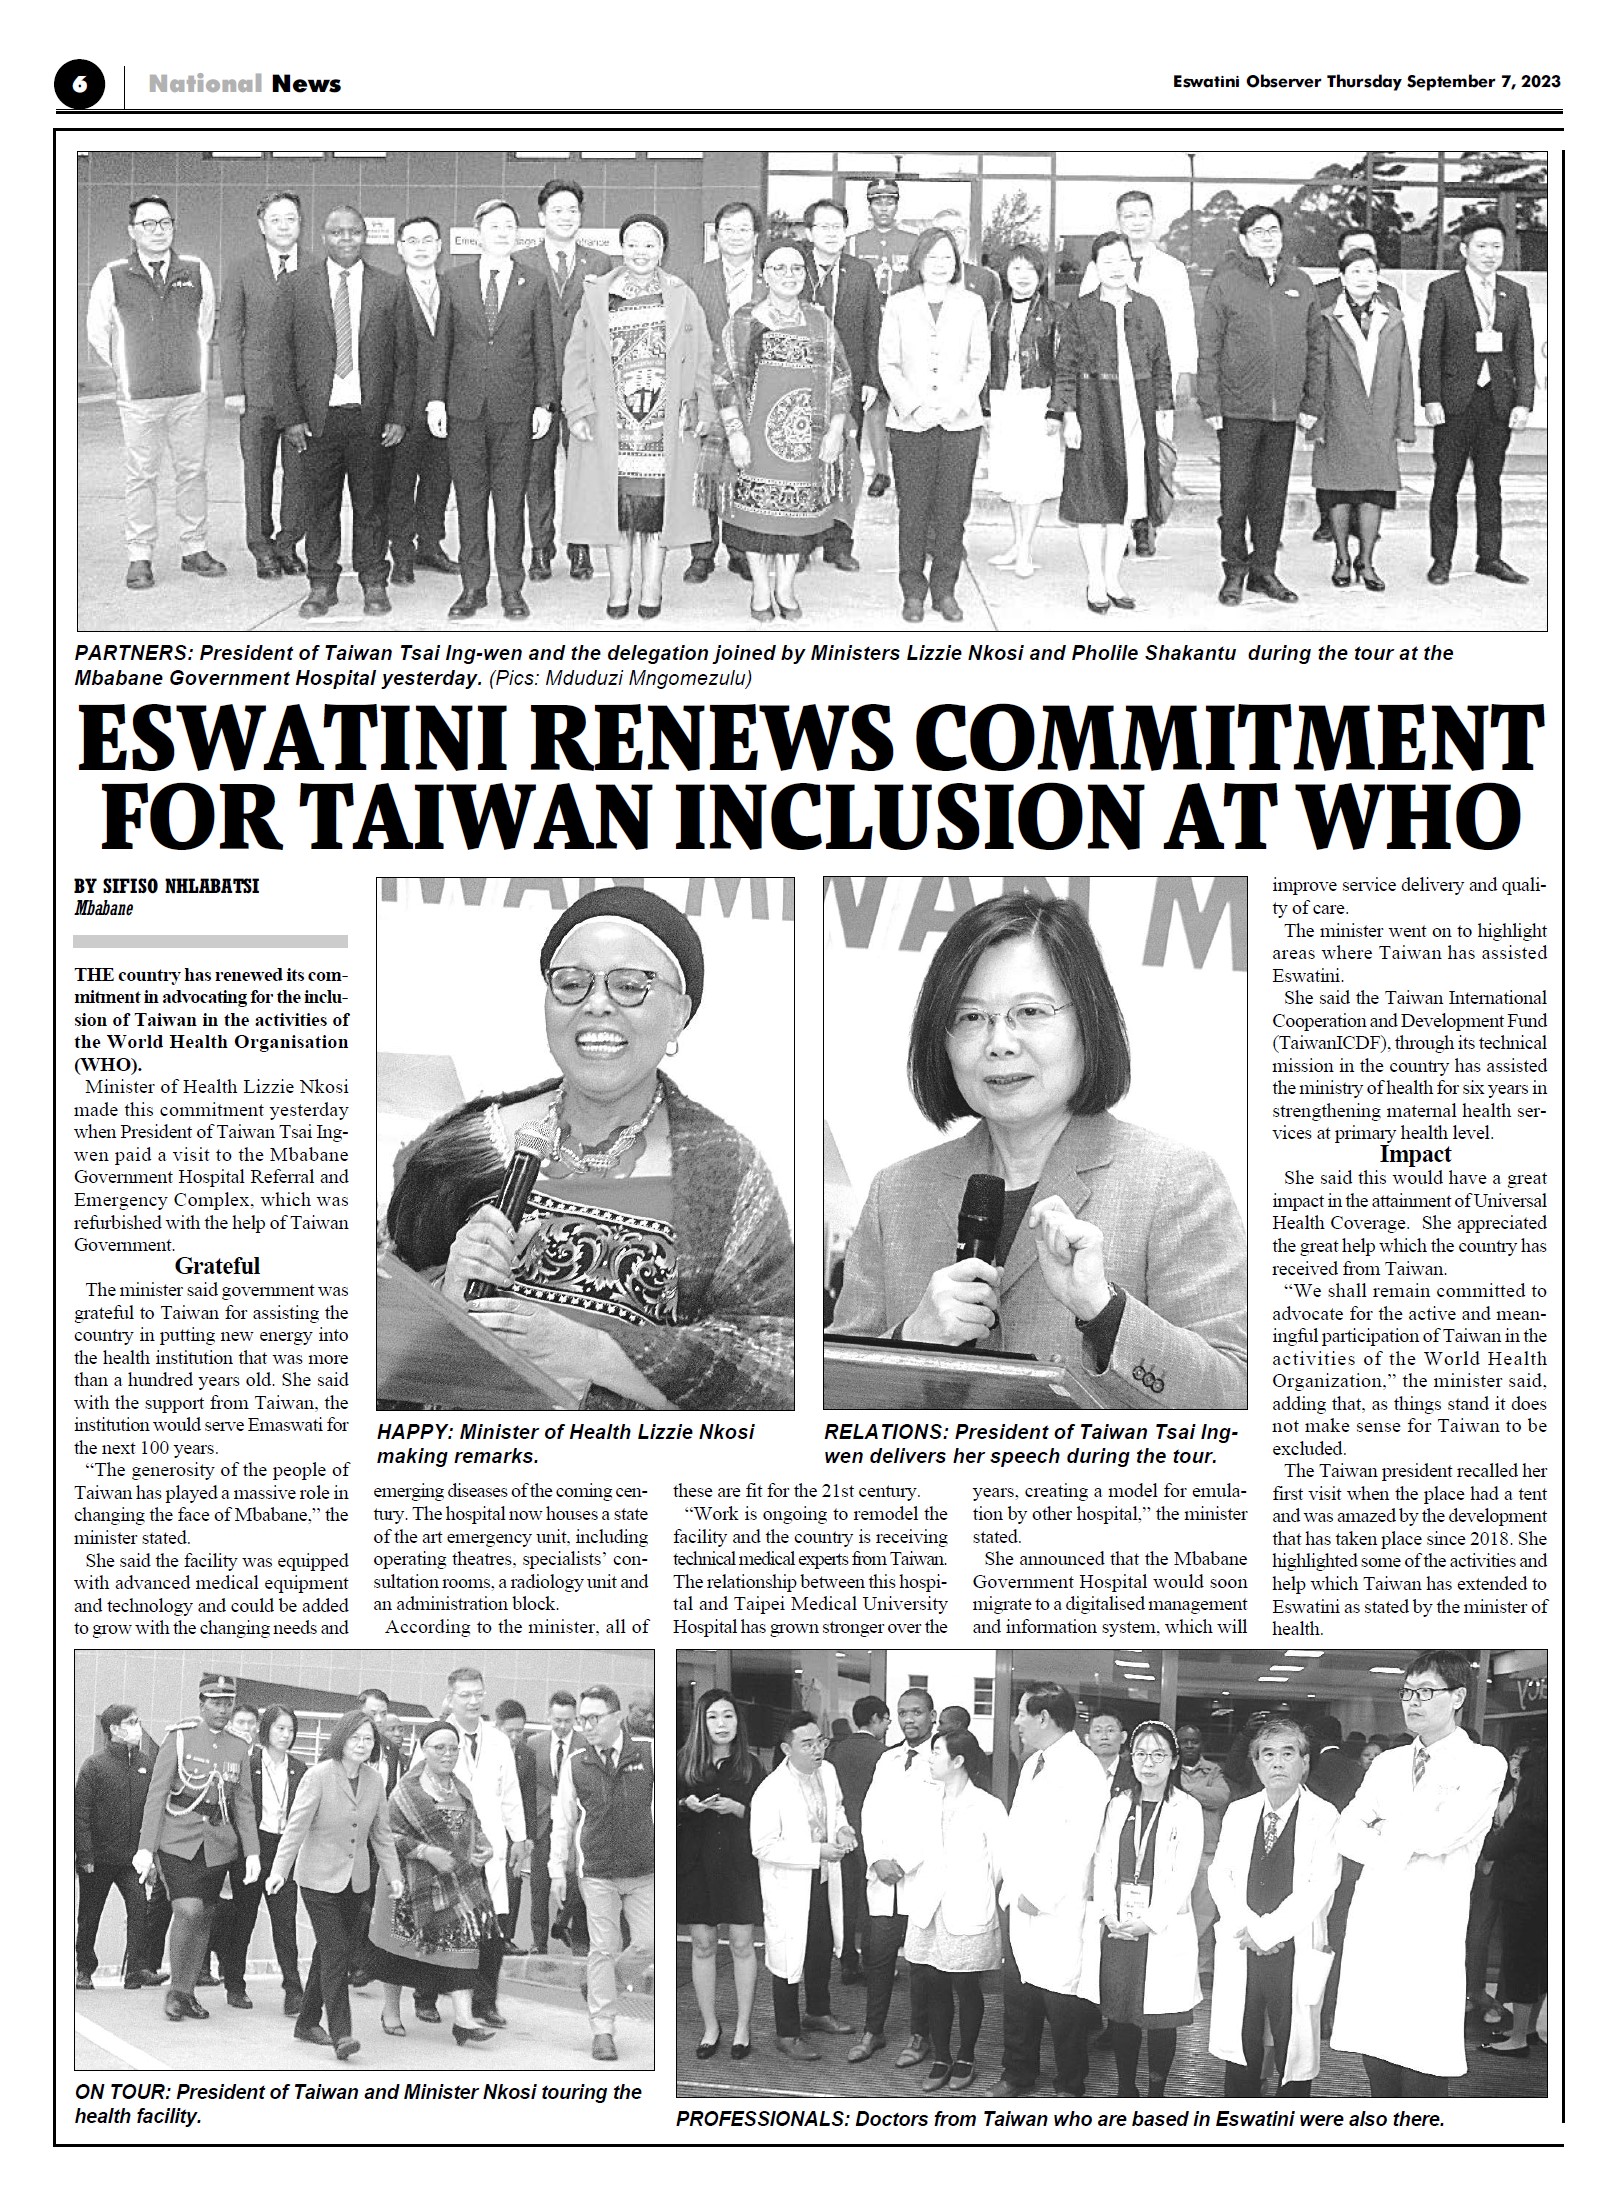 Eswatini renews commitment for Taiwan inclusion at WHO